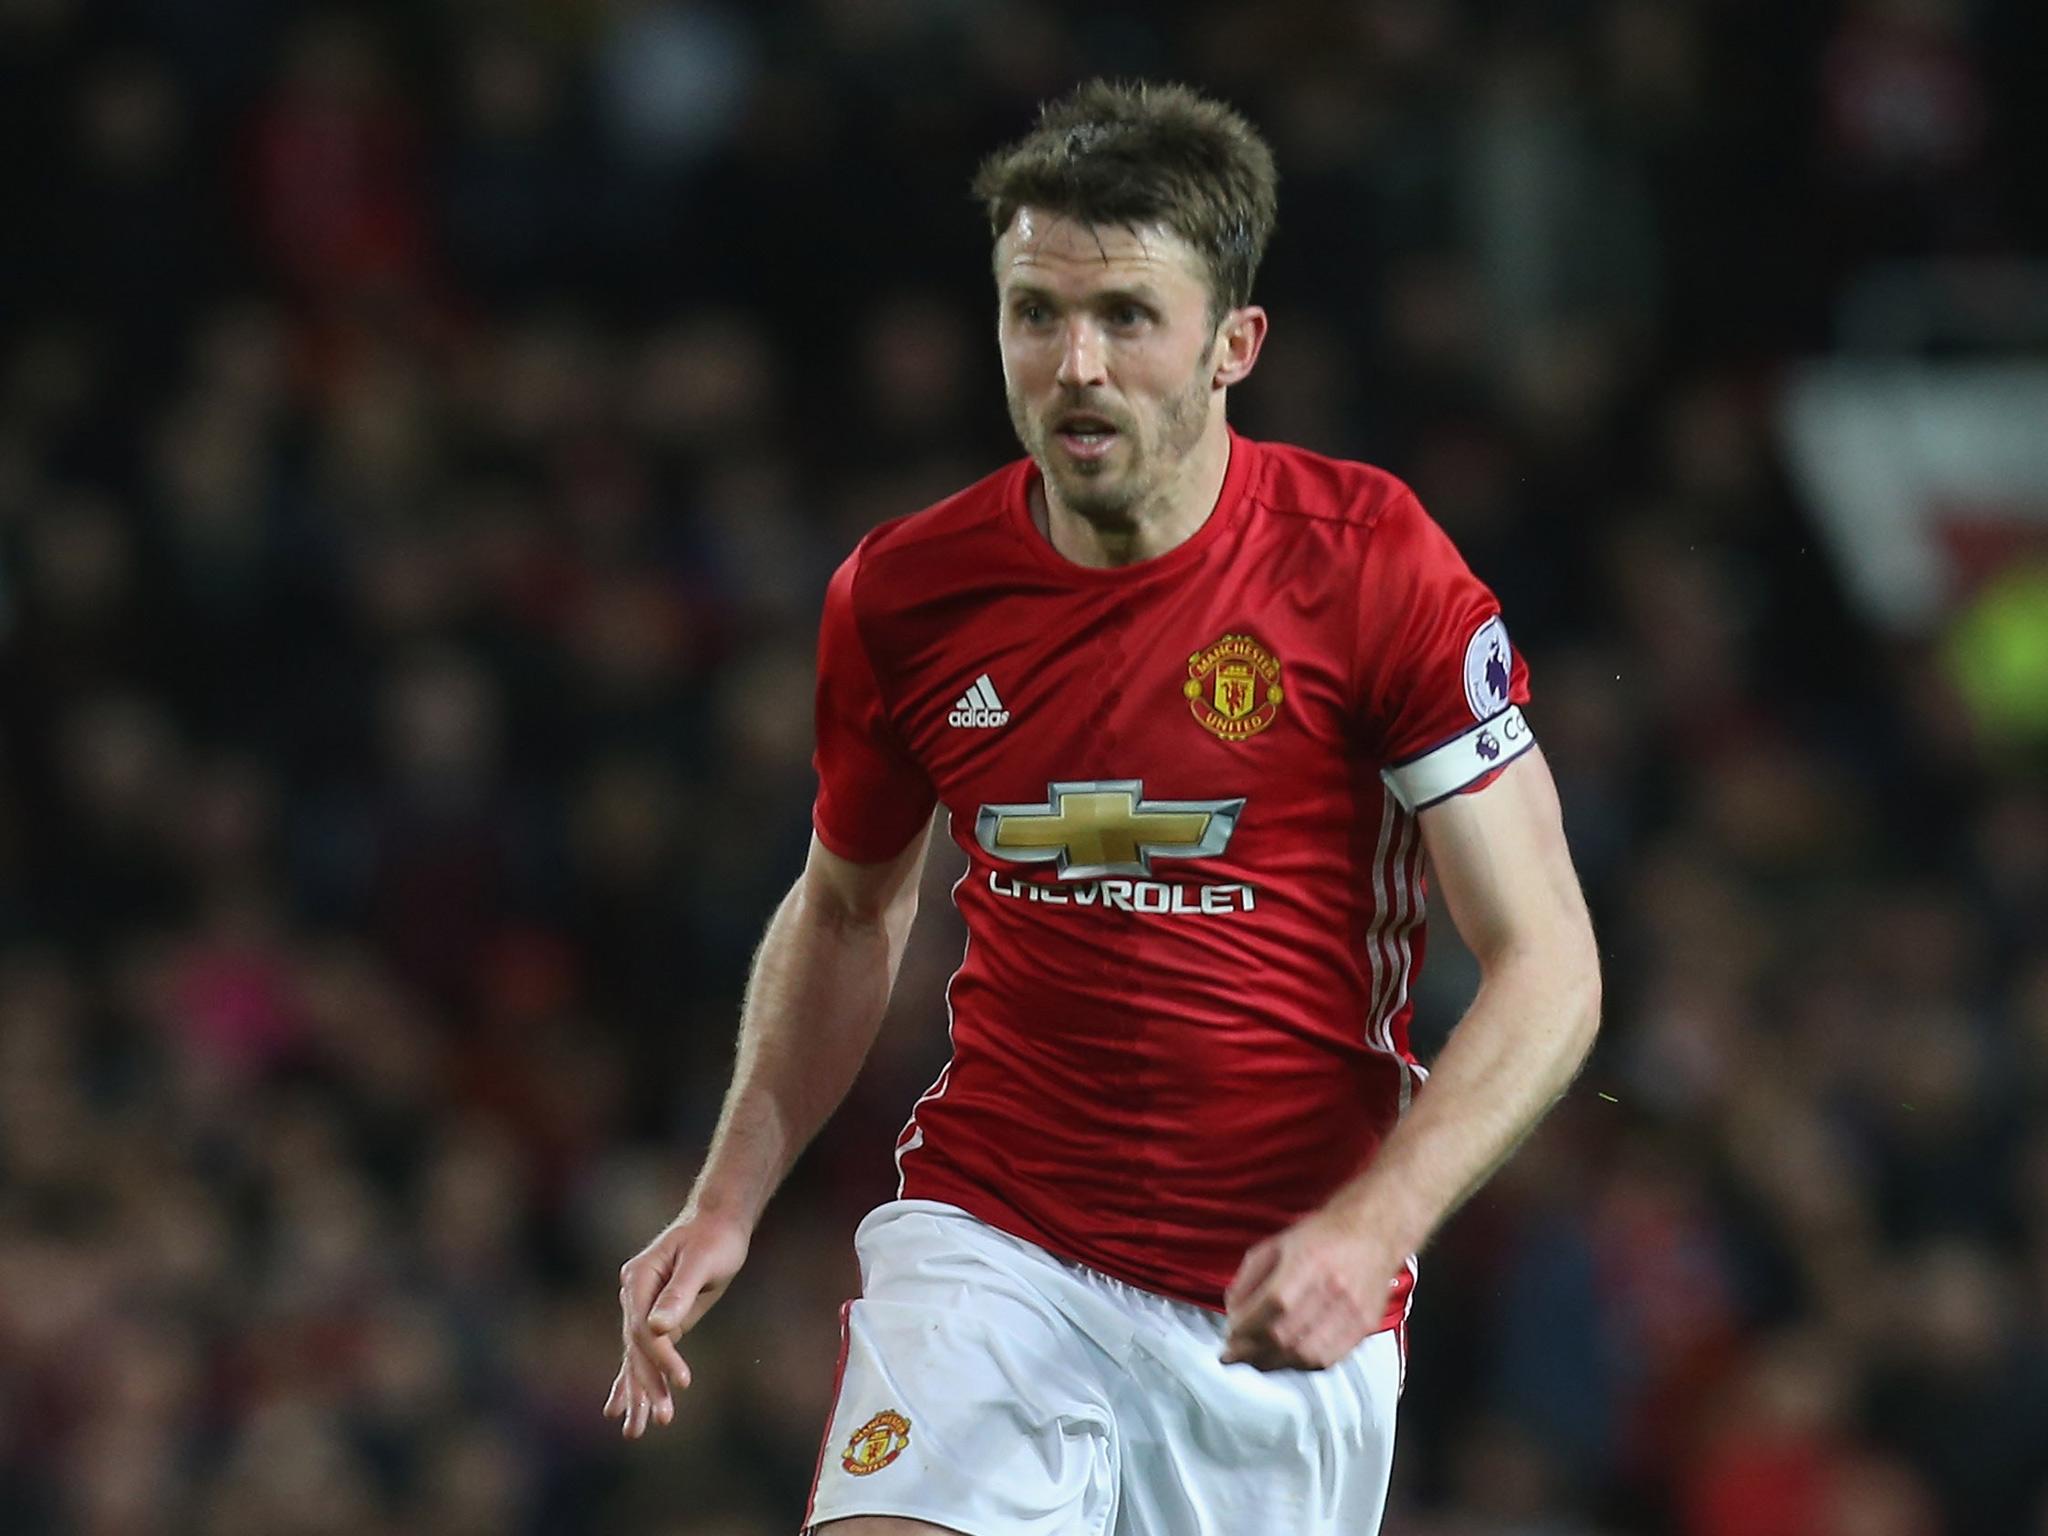 Carrick insists the performances are not the problem